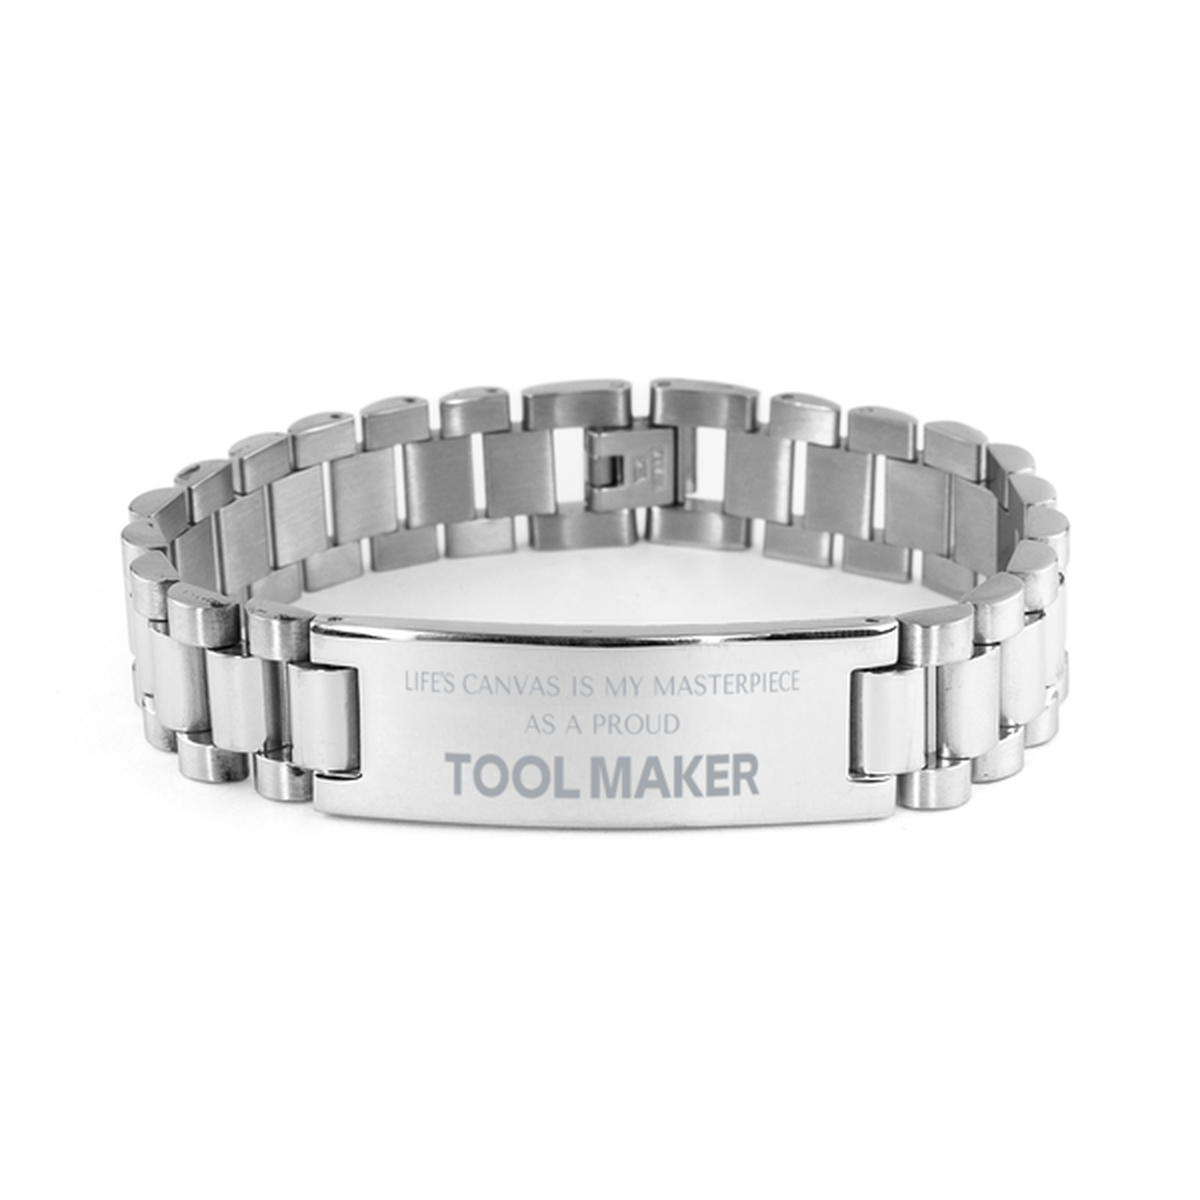 Proud Tool Maker Gifts, Life's canvas is my masterpiece, Epic Birthday Christmas Unique Ladder Stainless Steel Bracelet For Tool Maker, Coworkers, Men, Women, Friends